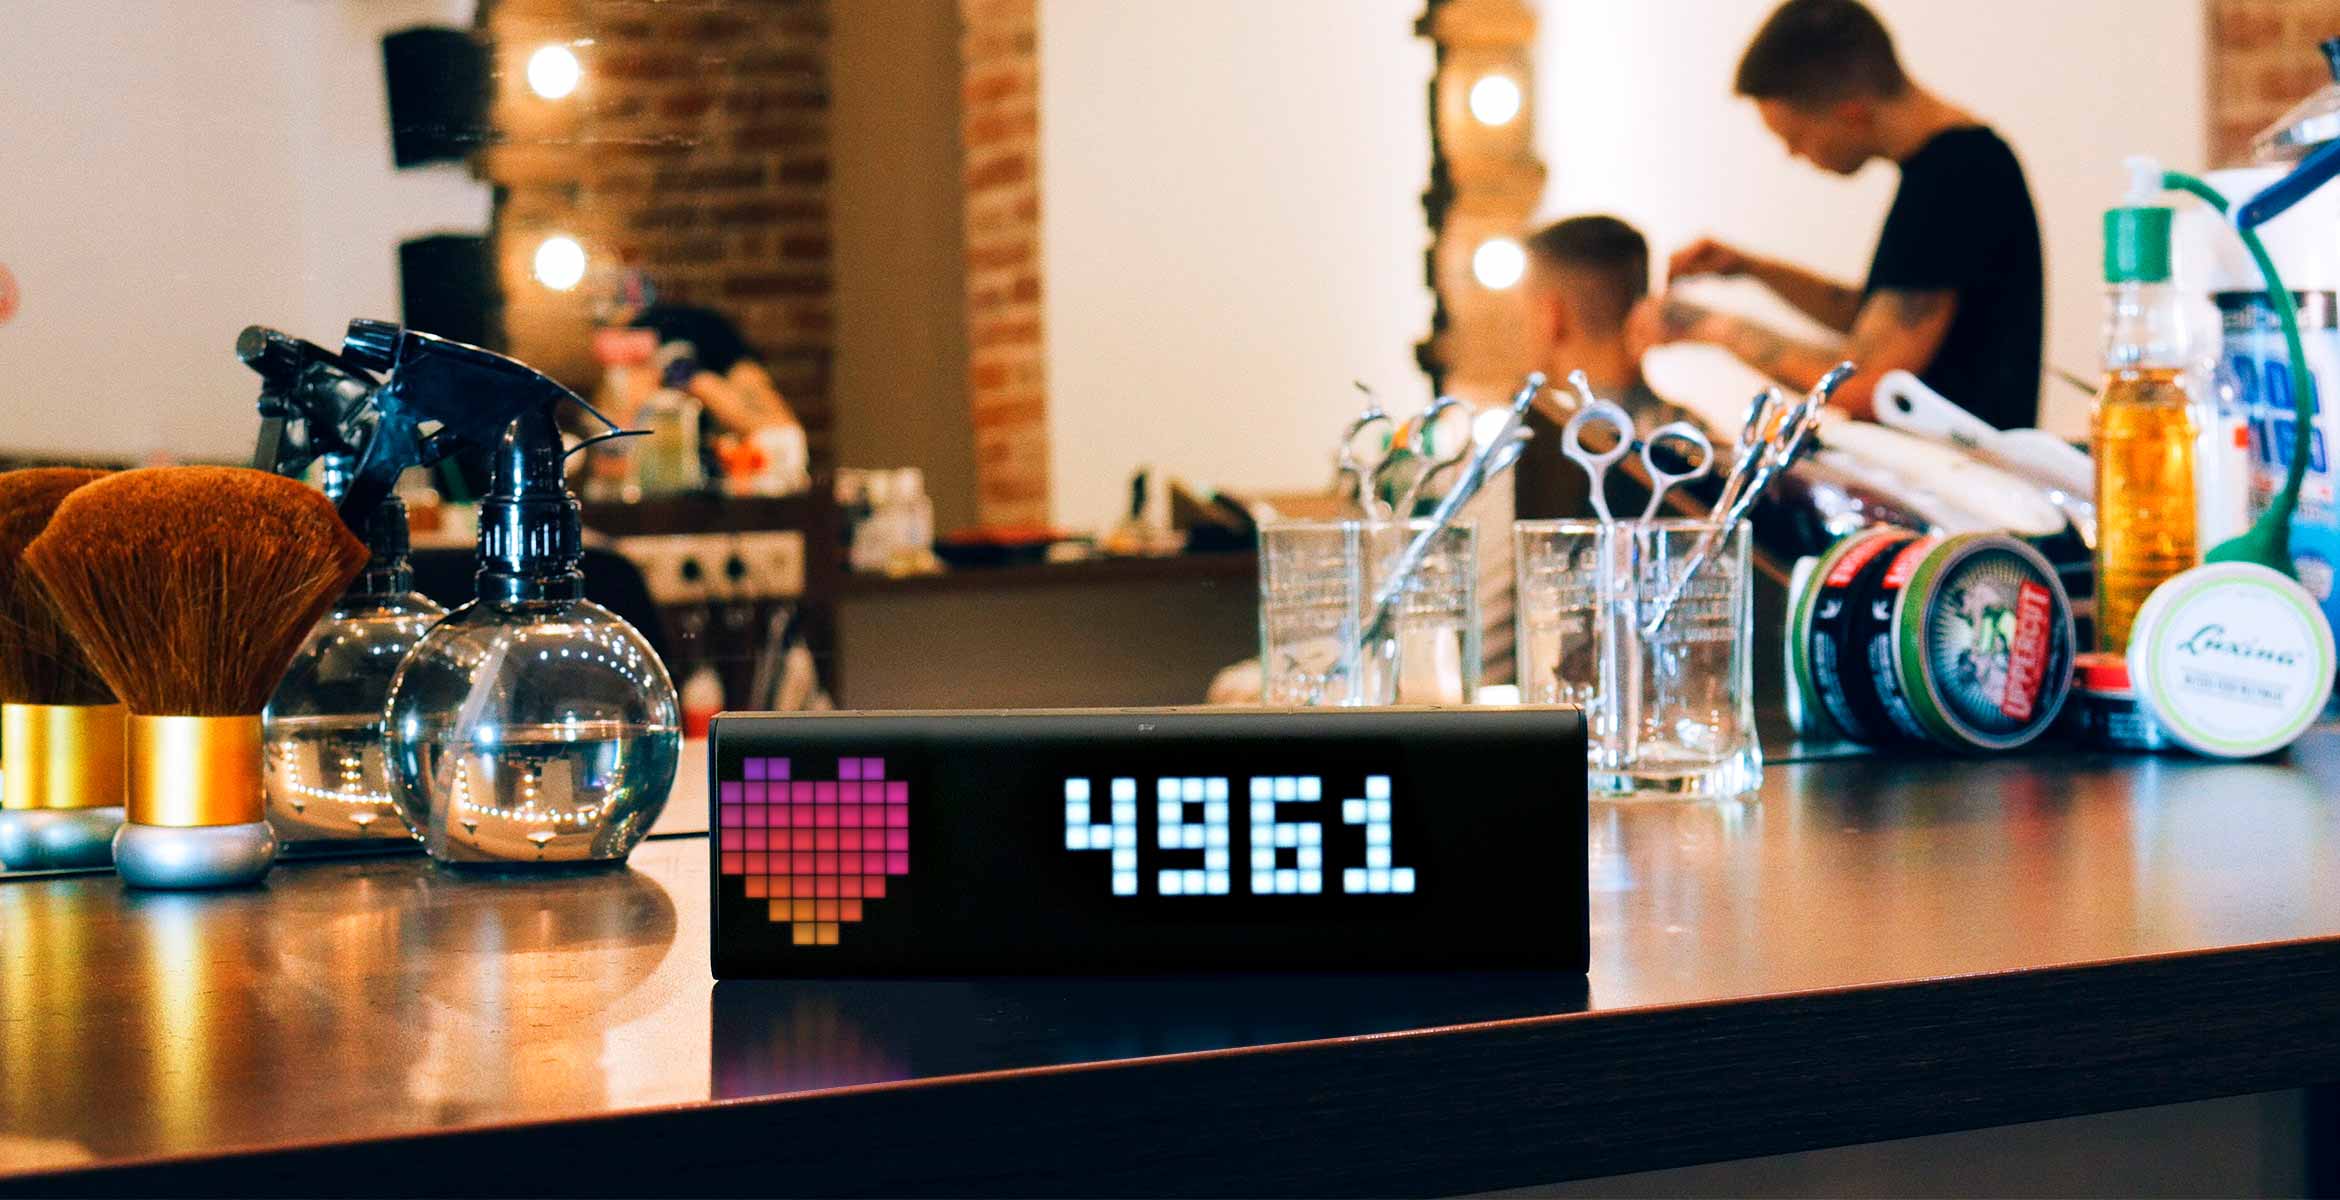 LaMetric Time smart clock, placed at the barbershop, displays follower count for your Instagram account